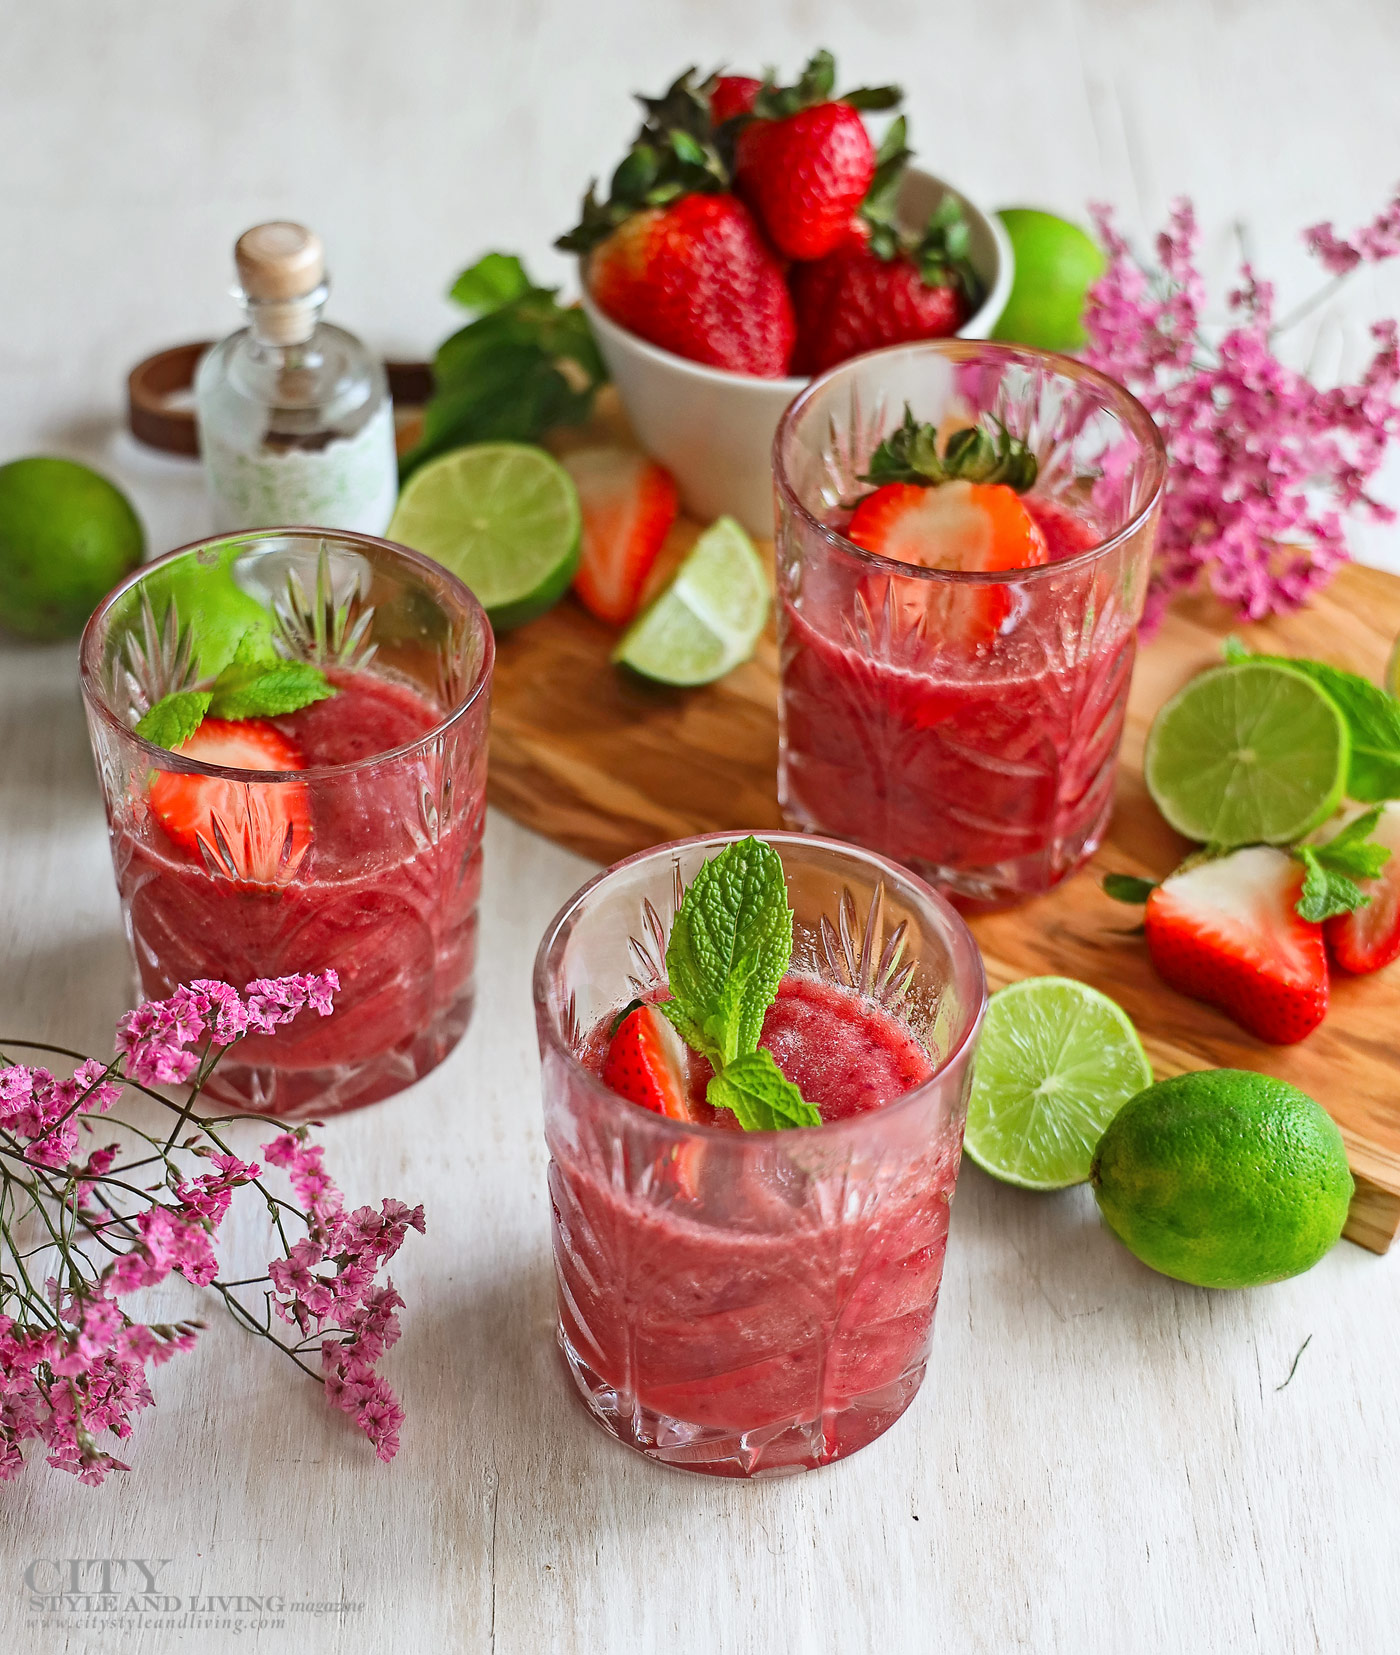 City Style and Living Magazine spring 2020 Food Strawberry and Lime Mojito Mocktail